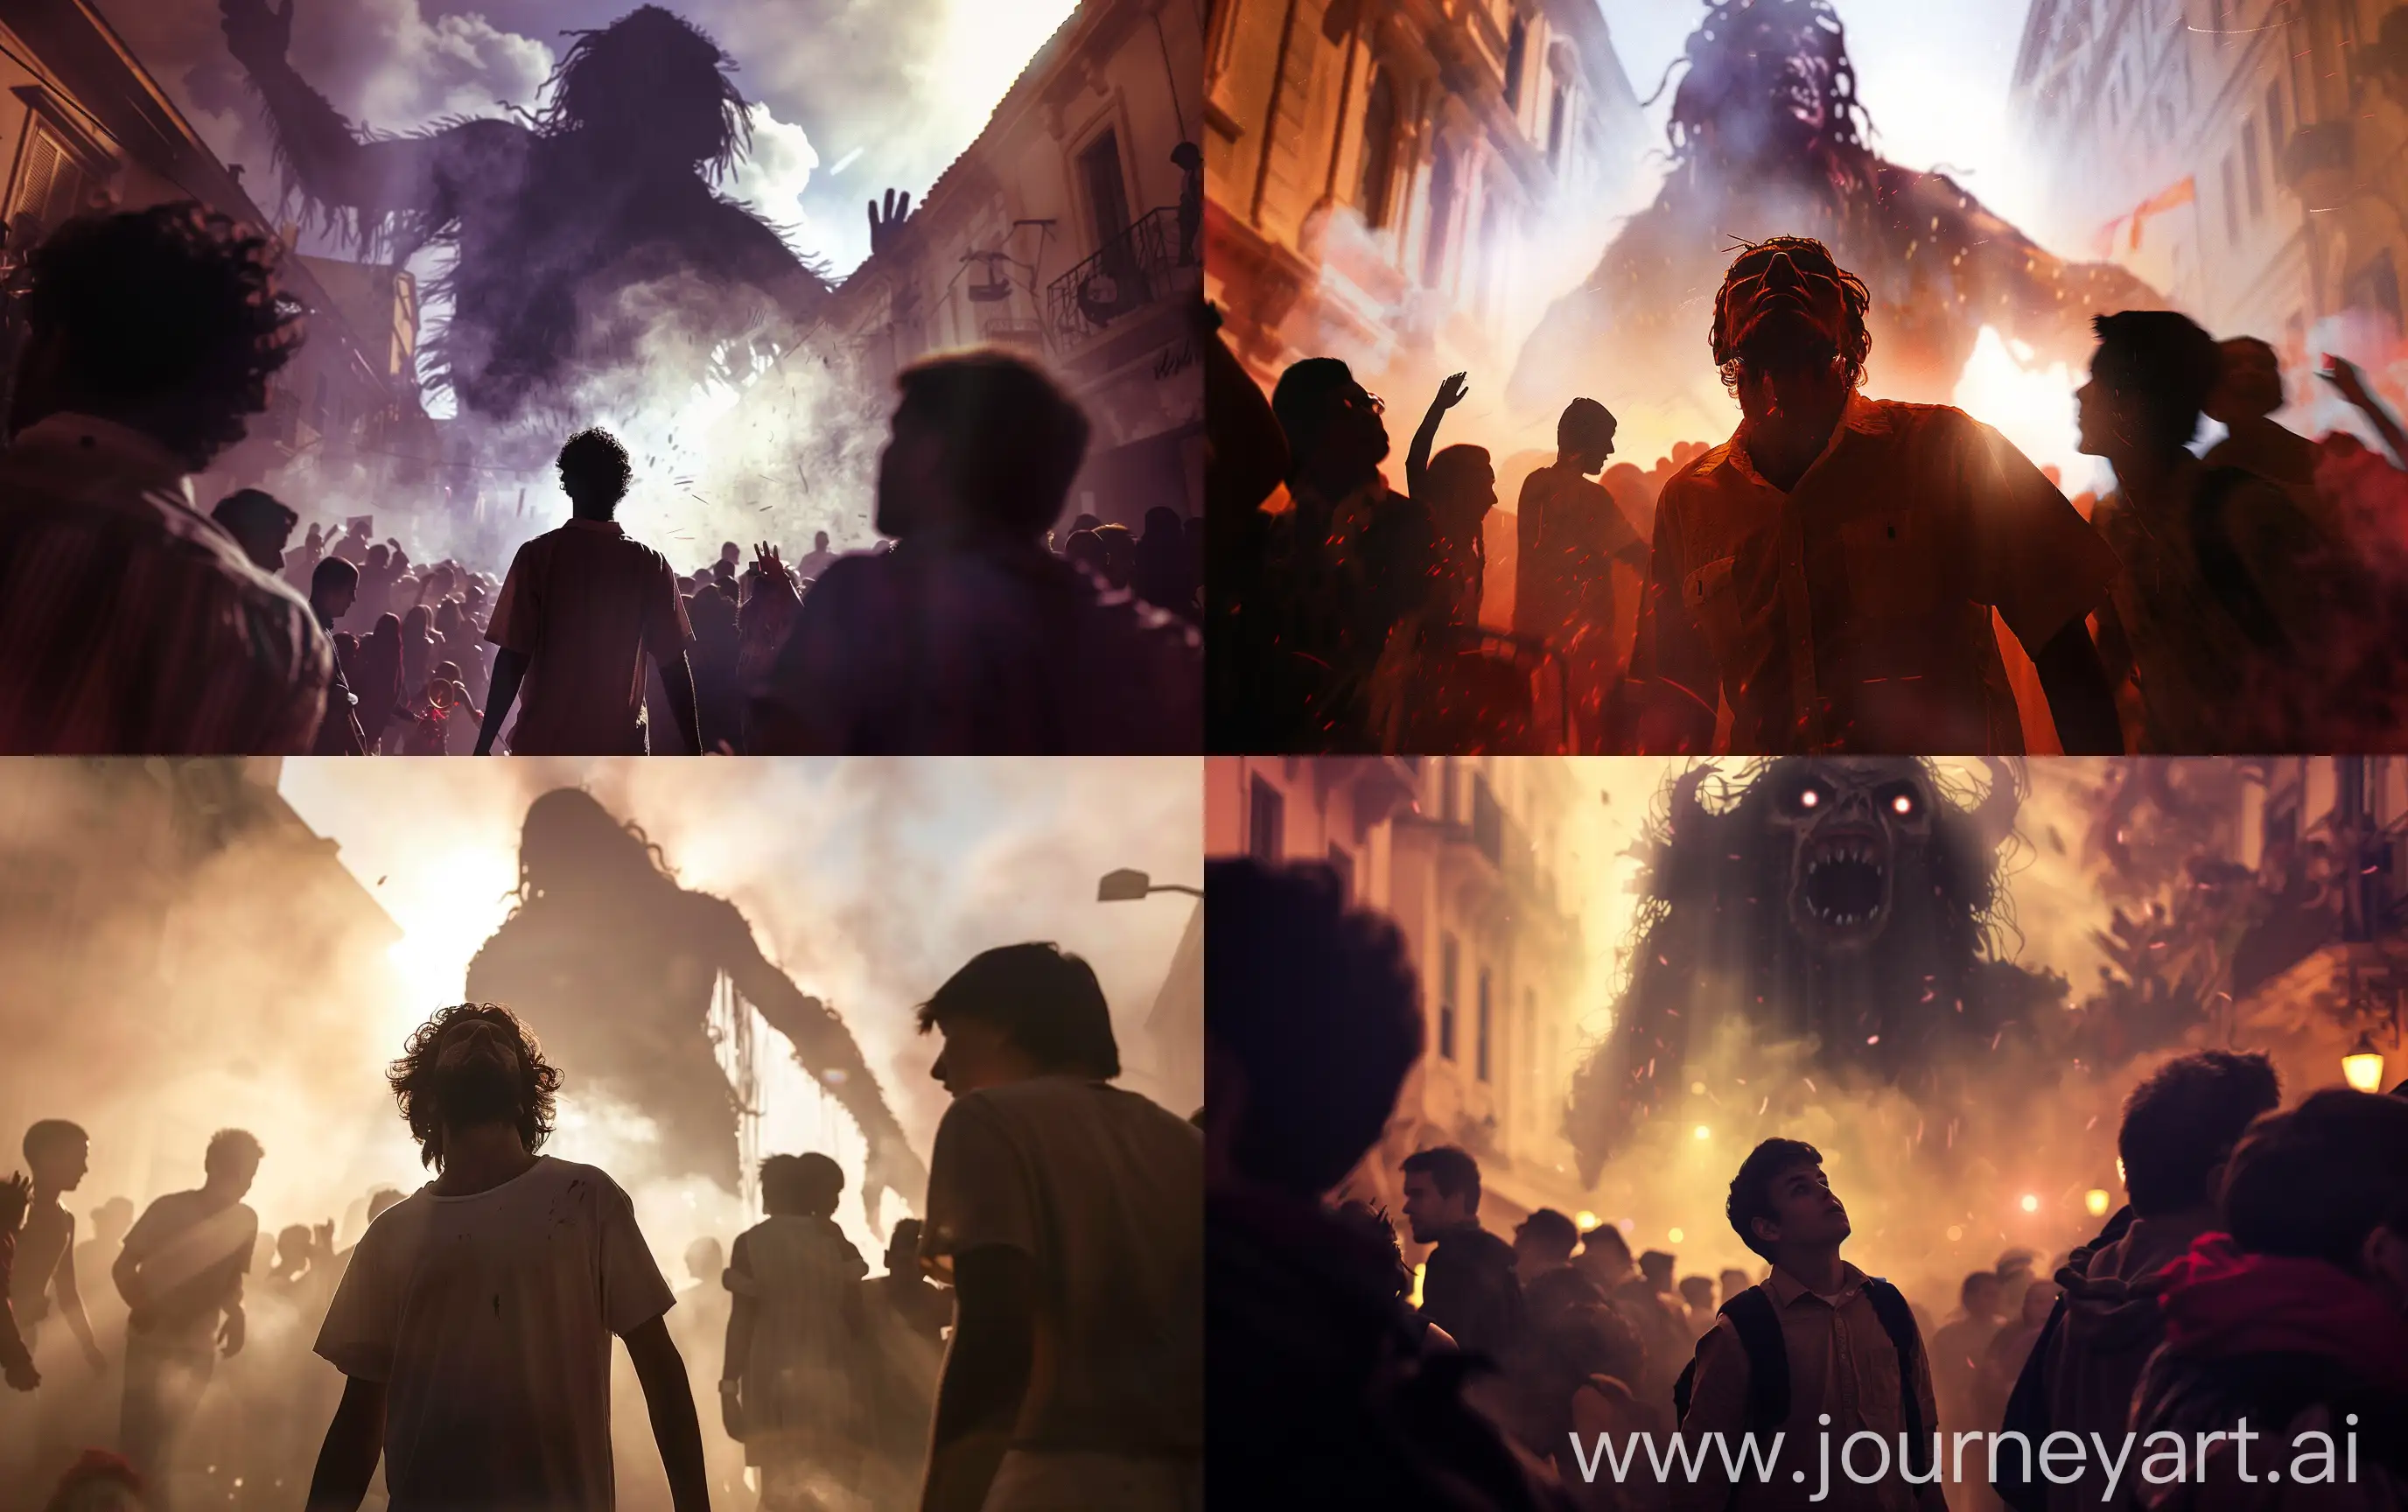 Joyful-Carnival-Procession-with-Giant-Antichrist-Silhouette